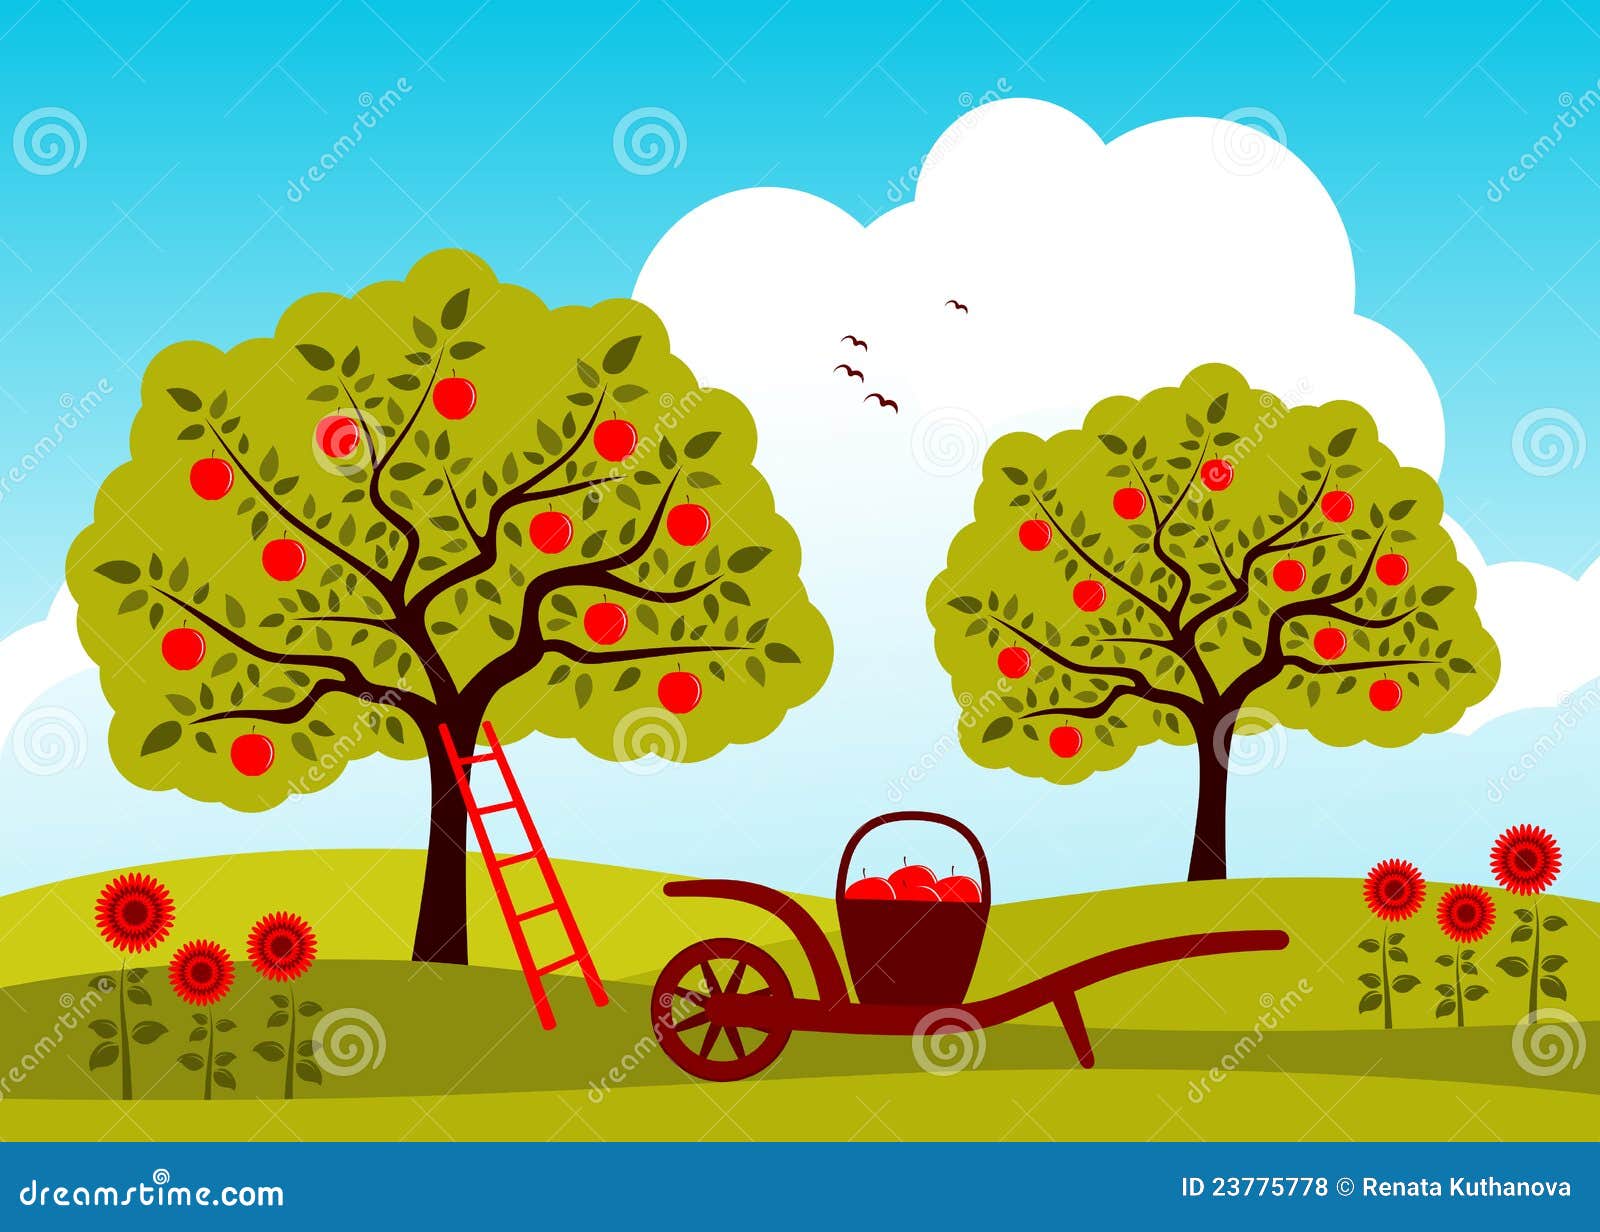 apple picking clipart - photo #50